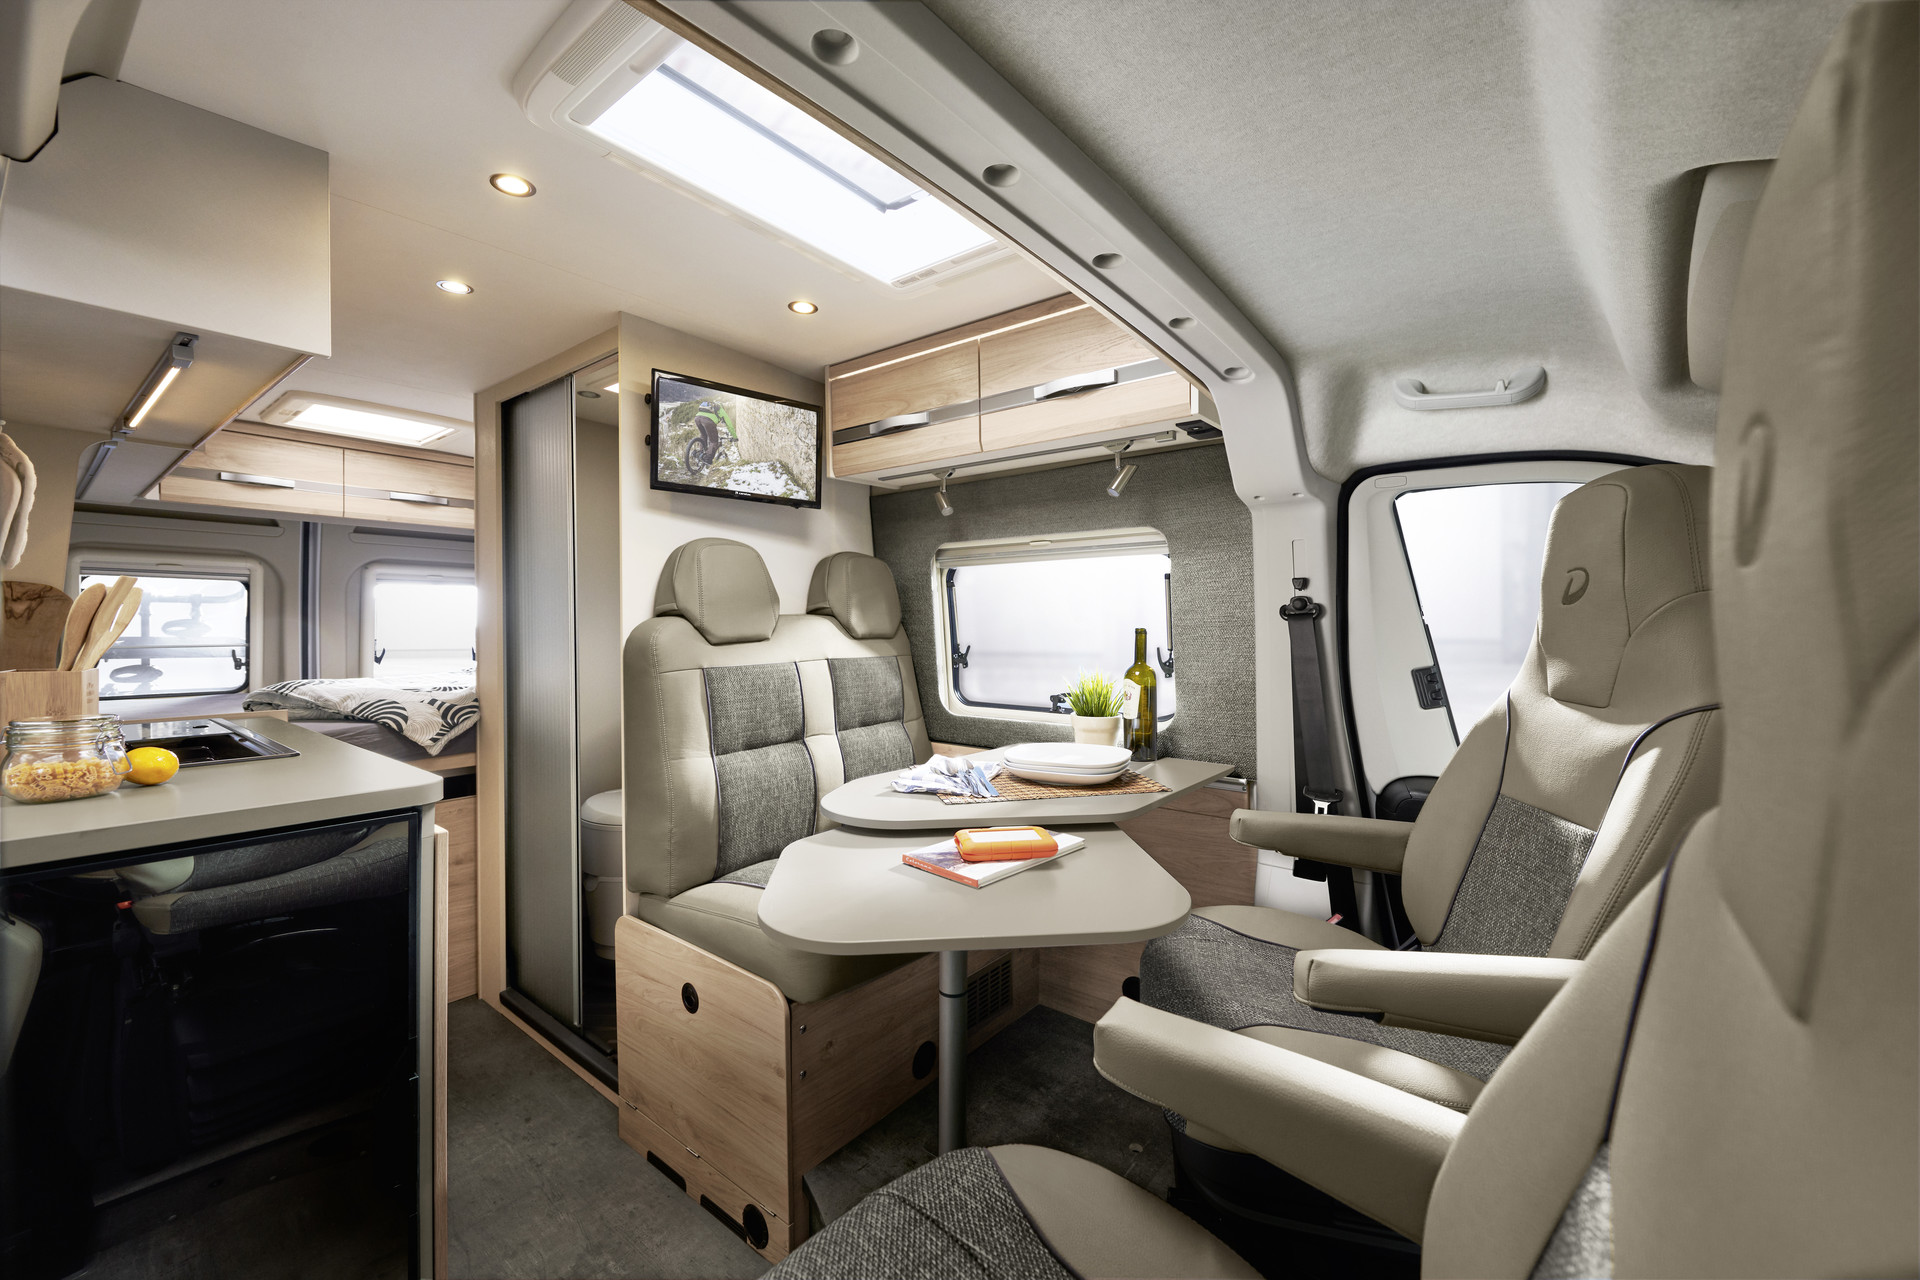 High-quality materials, tasteful colour schemes and exquisite workmanship make the Globetrail a genuine Dethleffs vehicle. The flush-fitting windows are included in the 90 Years edition.